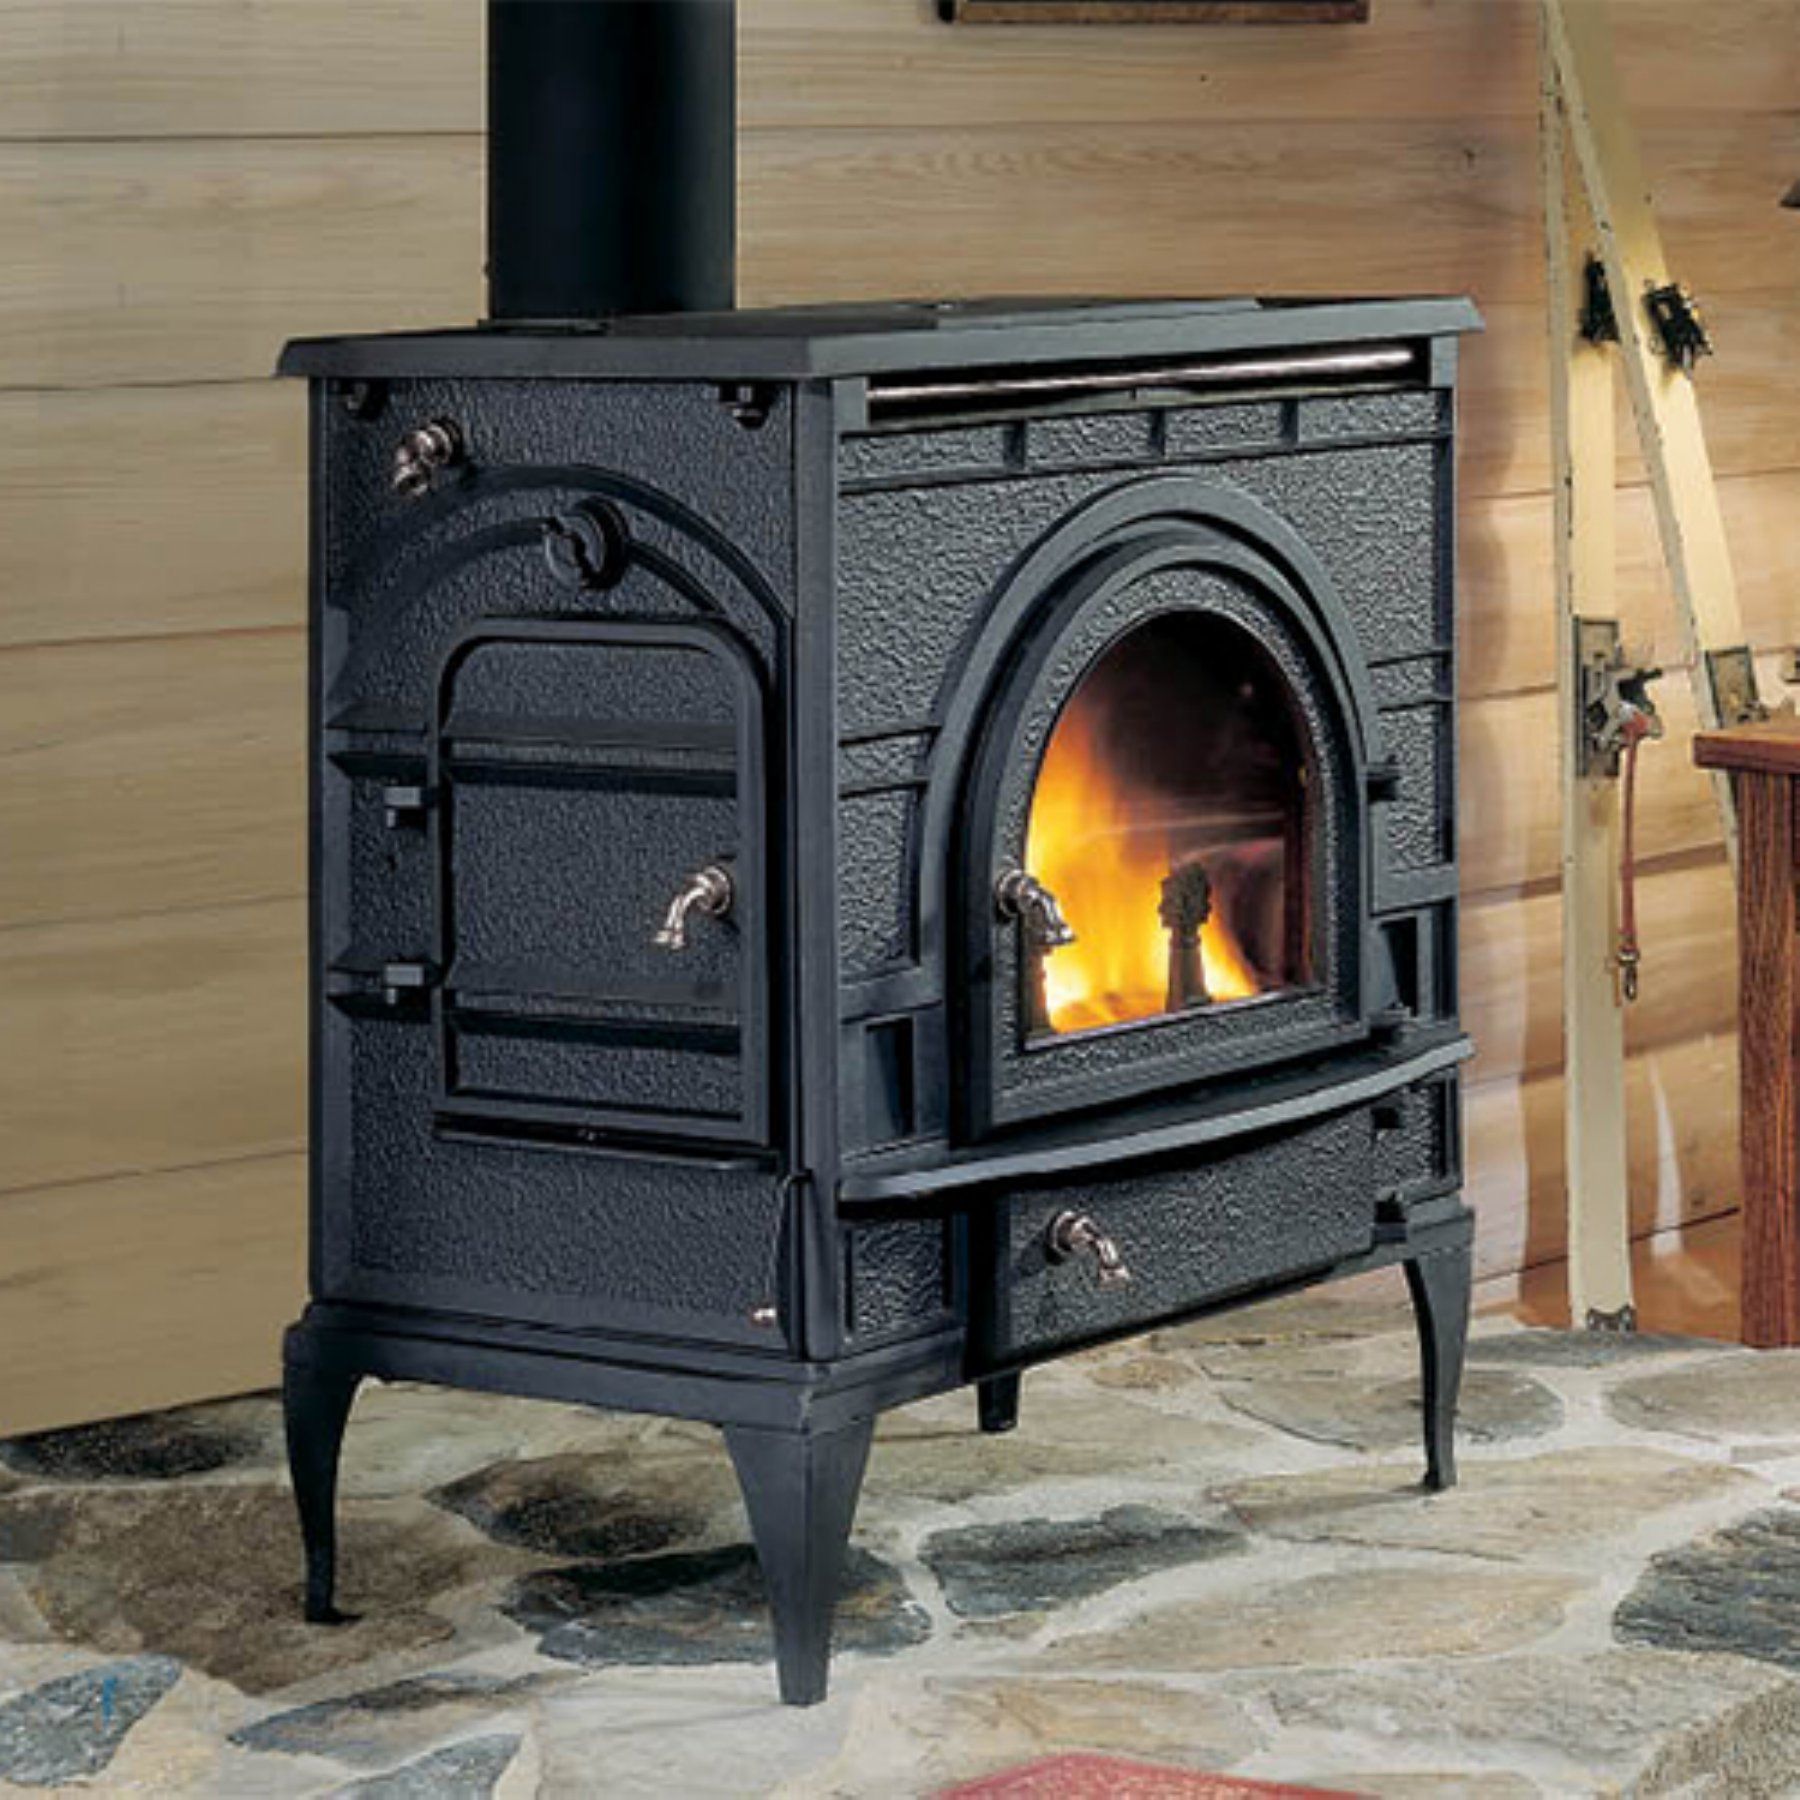 Fireplace Smells In the Summer Unique Majestic Dutchwest Catalytic Wood Stove Ned220